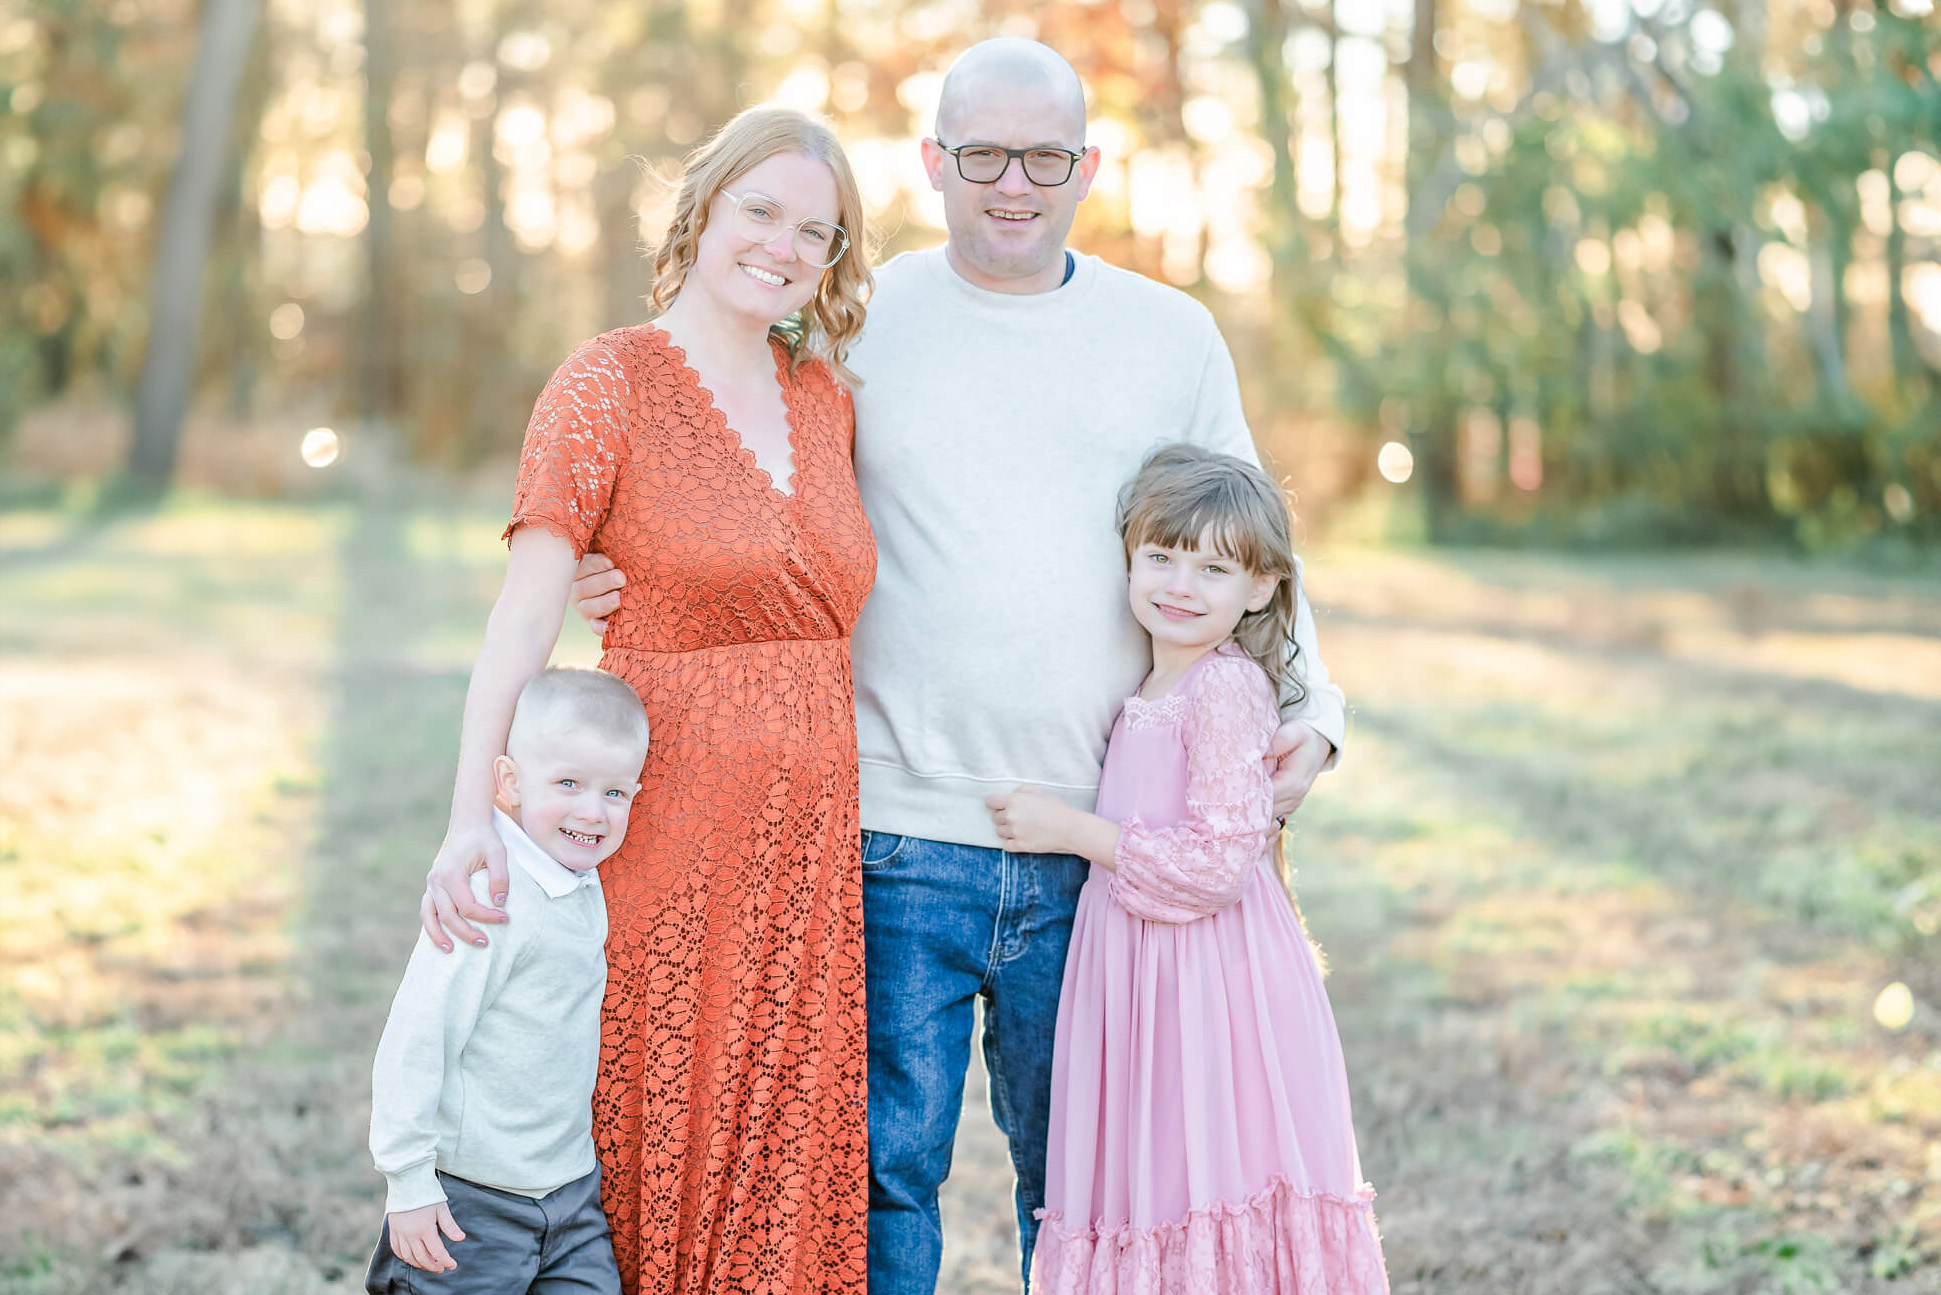 A family of 4 poses for a picture. Dad and son are wearing jeans and off-white sweaters. Mom is in and orange dress and daughter in a pink dress. After the session they went to eat at a family friendly restaurant in Virginia Beach.